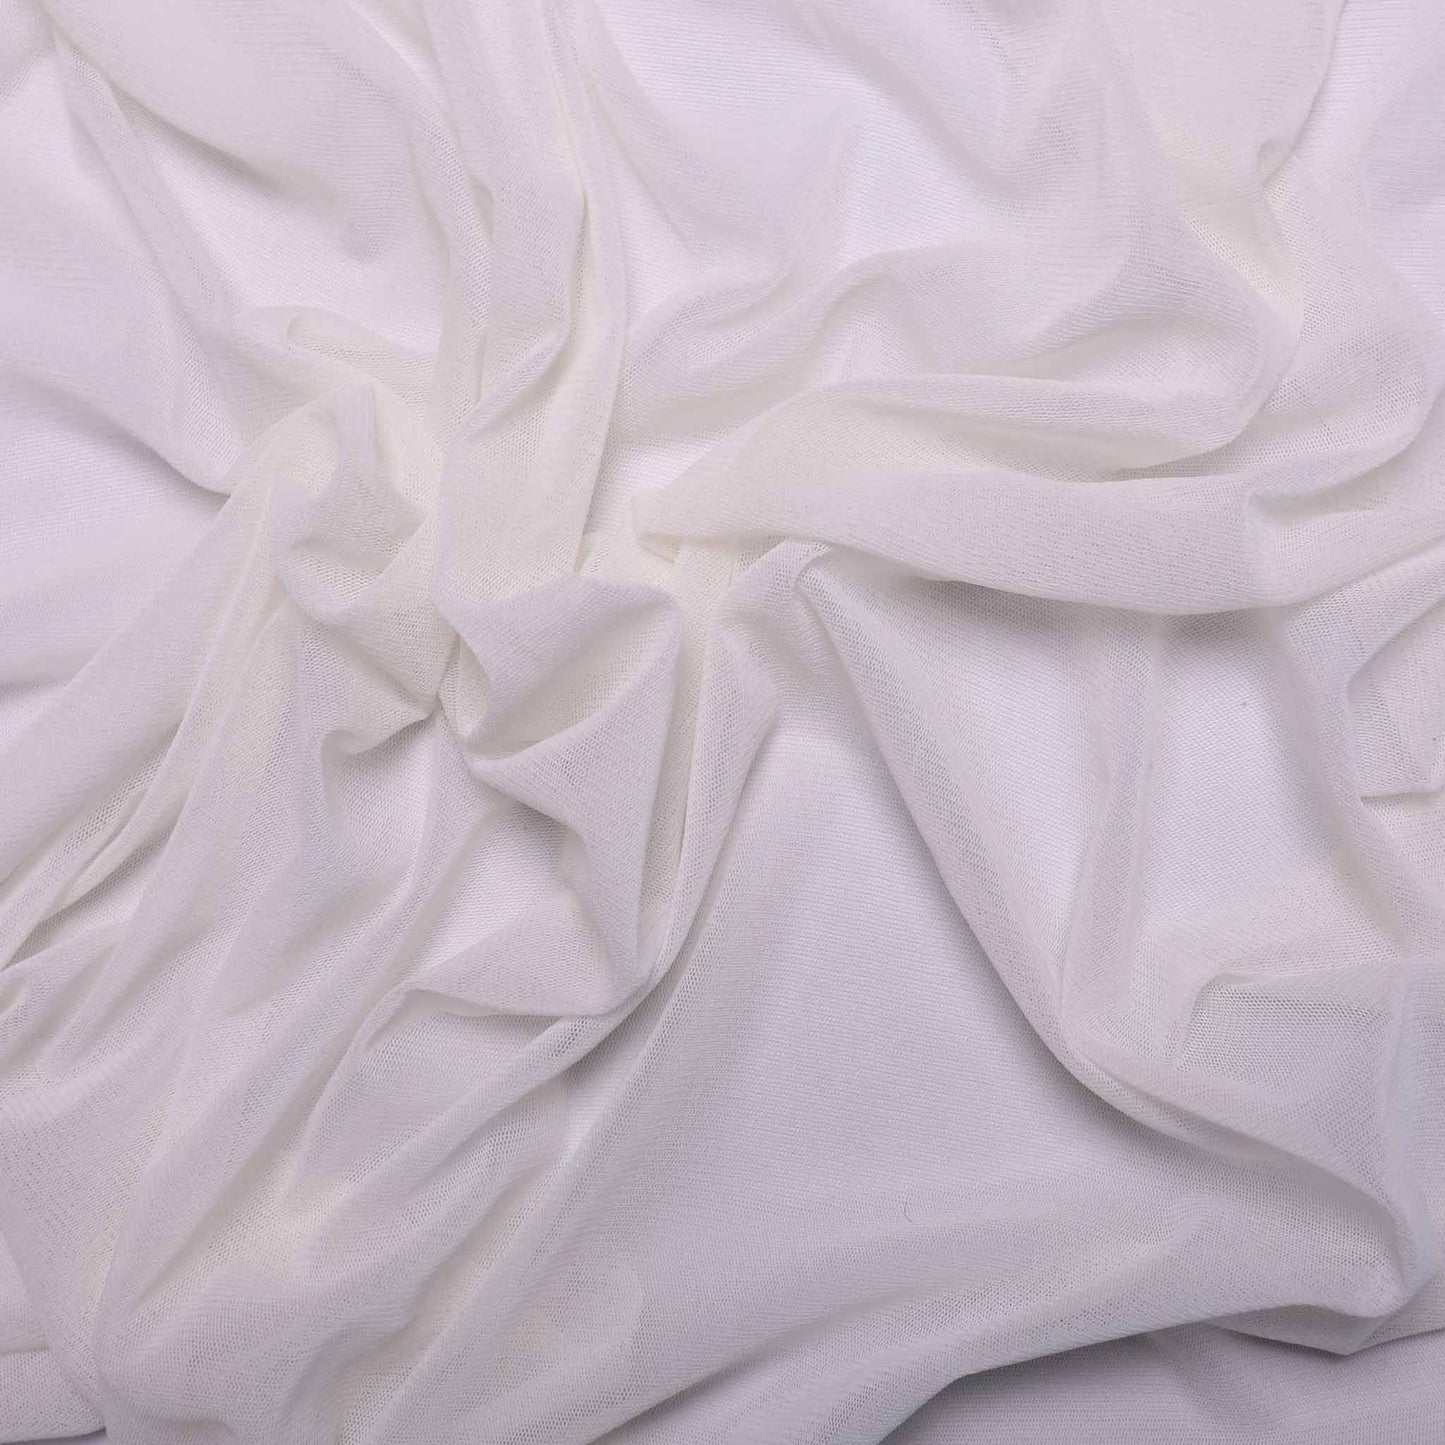 white stretchy netting fabric for dressmaking